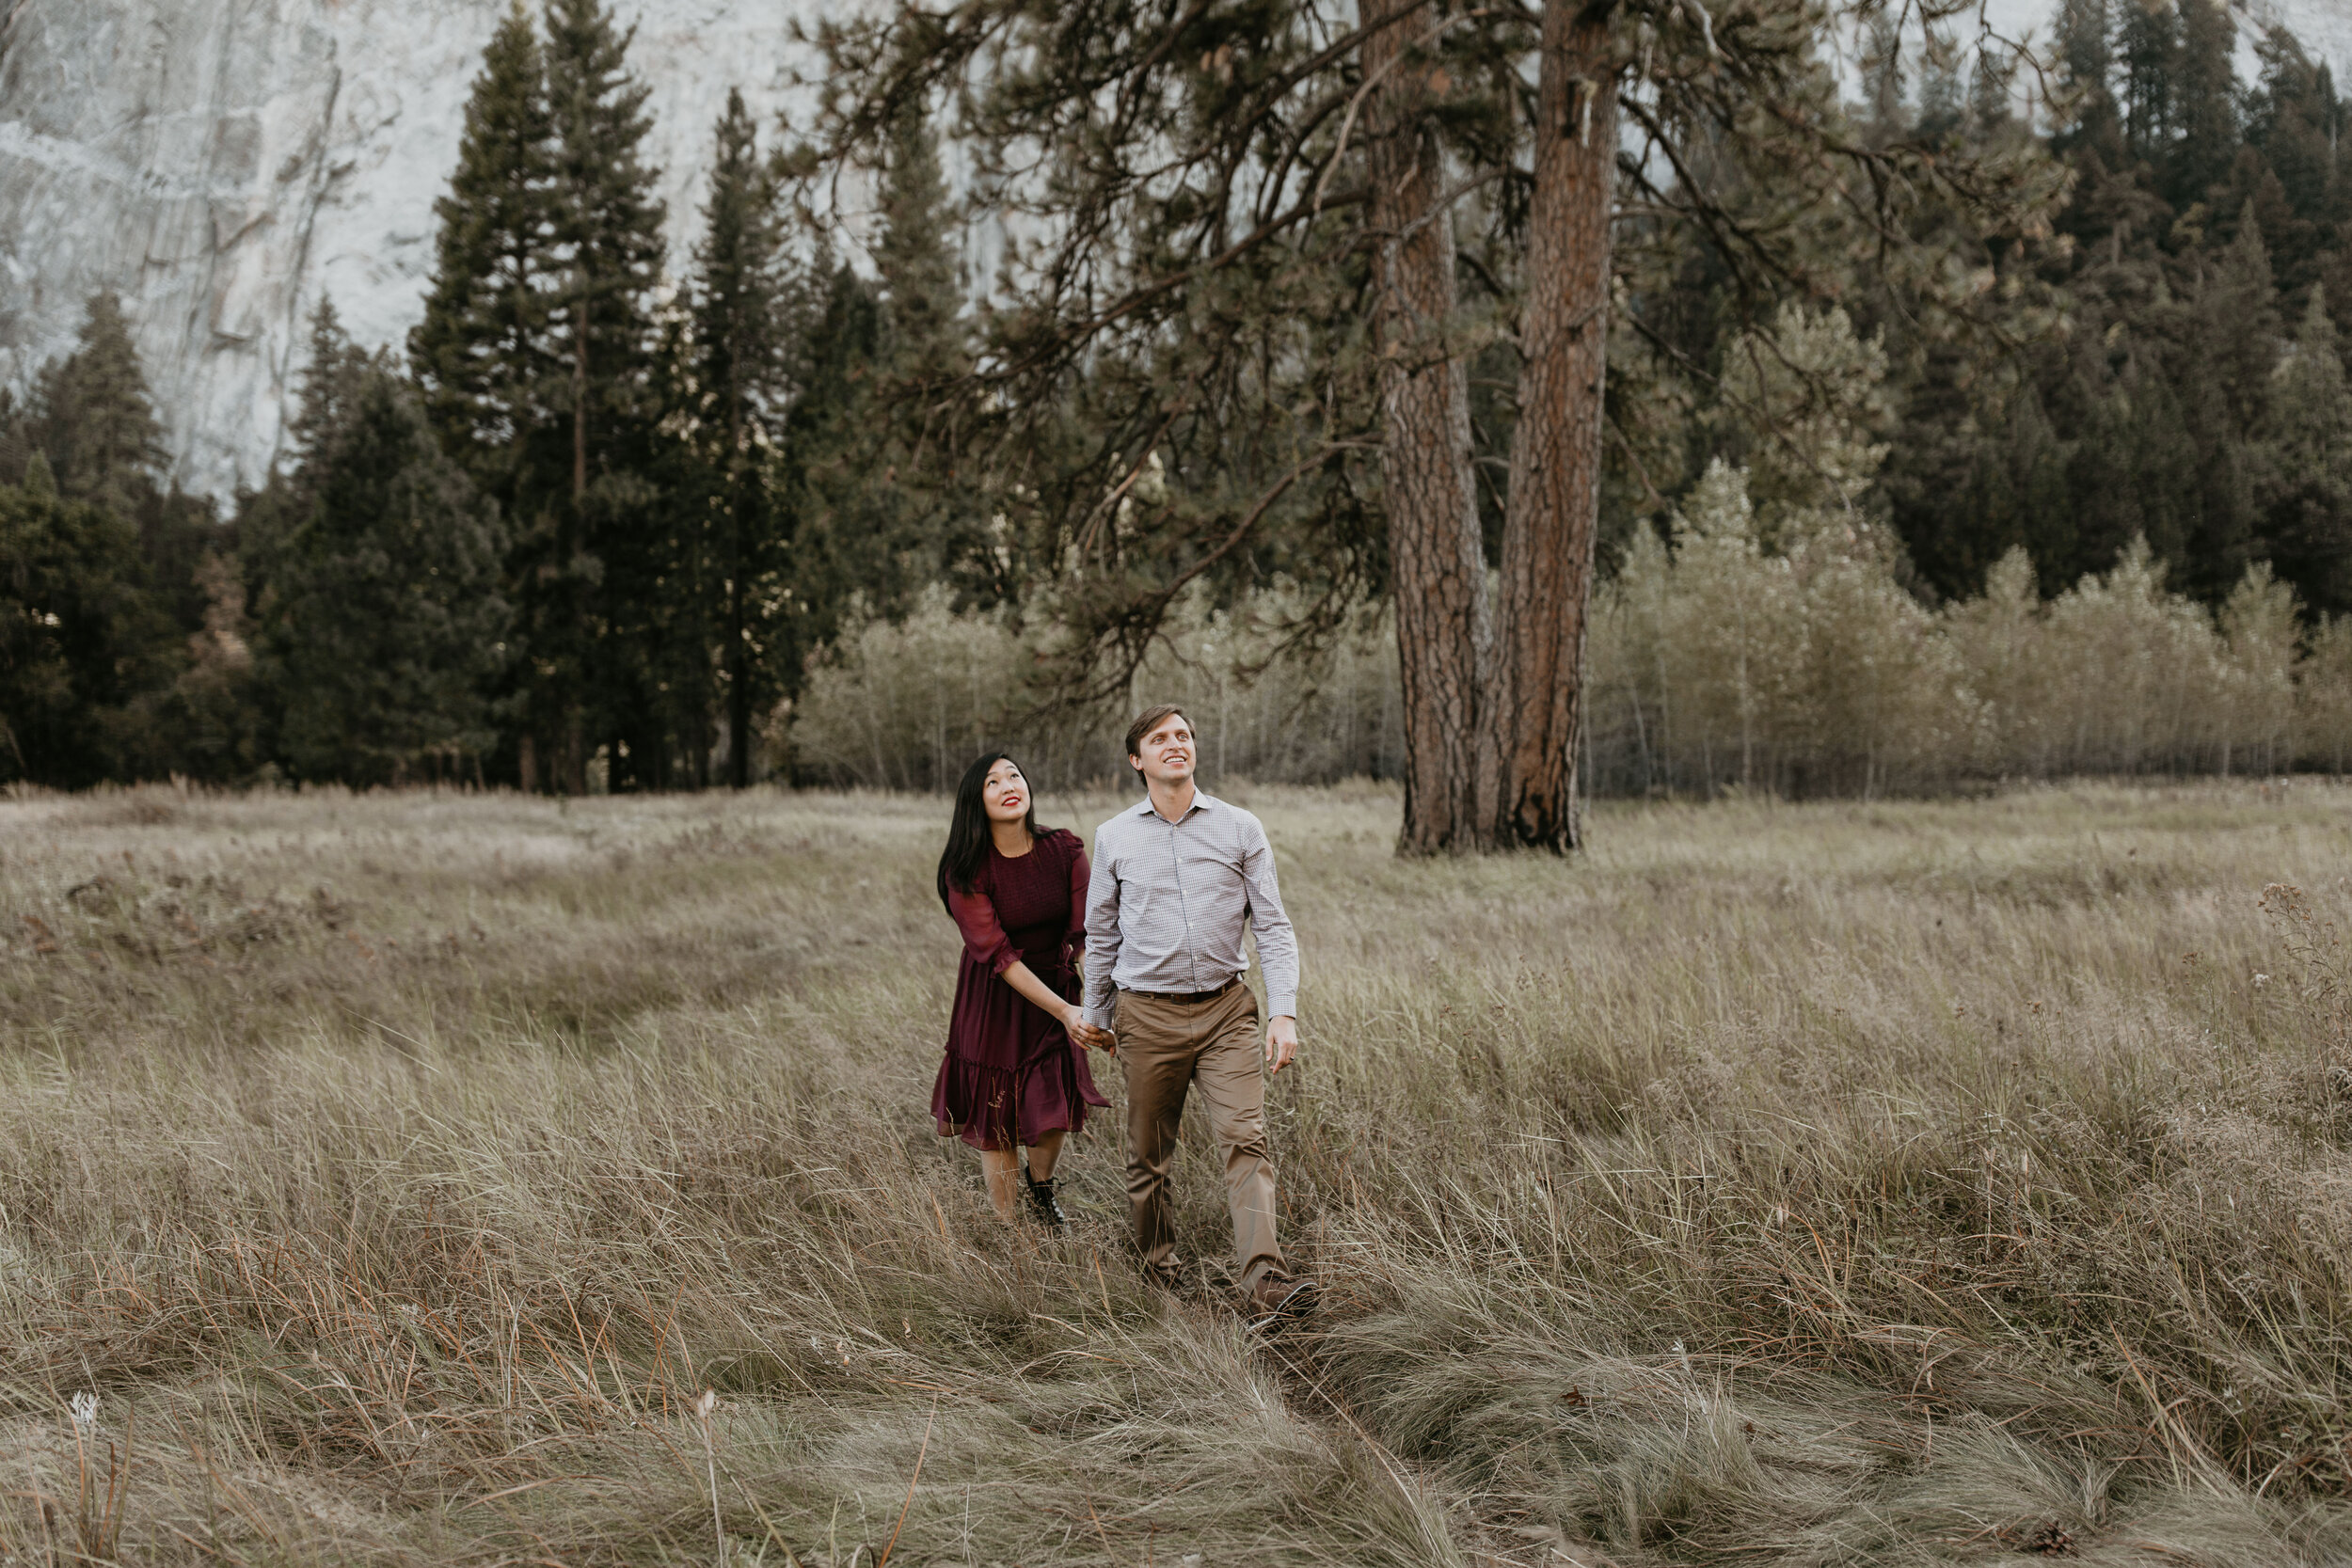 yosemite-national-park-couples-session-at-taft-point-and-yosemite-valley-yosemite-elopement-photographer-nicole-daacke-photography-105.jpg